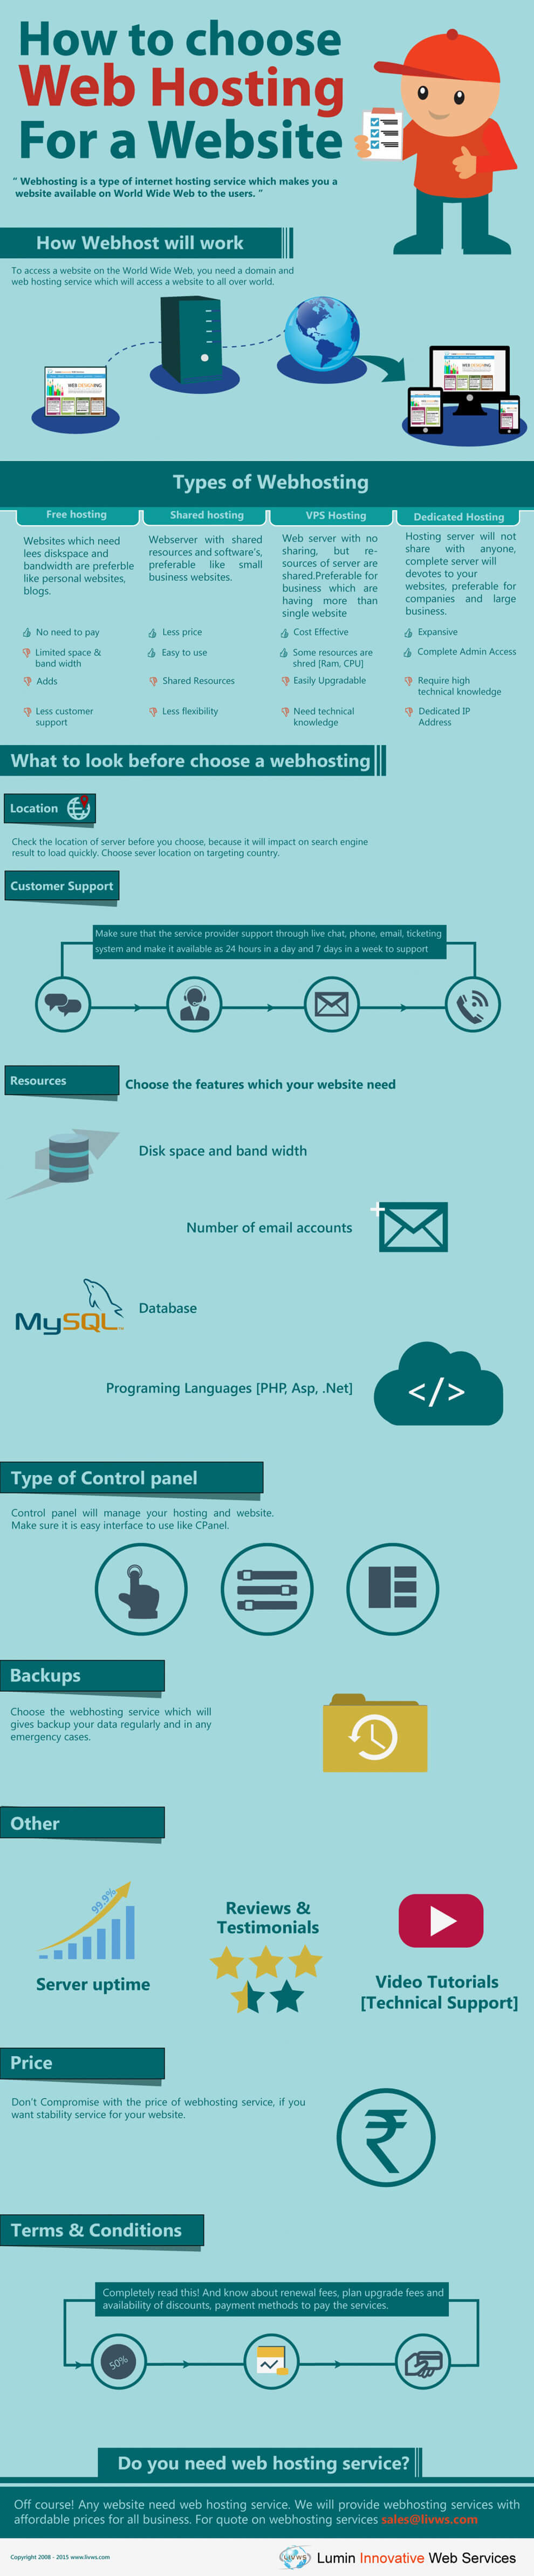 How to Choose Web Hosting Plan for a Website [INIFOGRAPHIC]